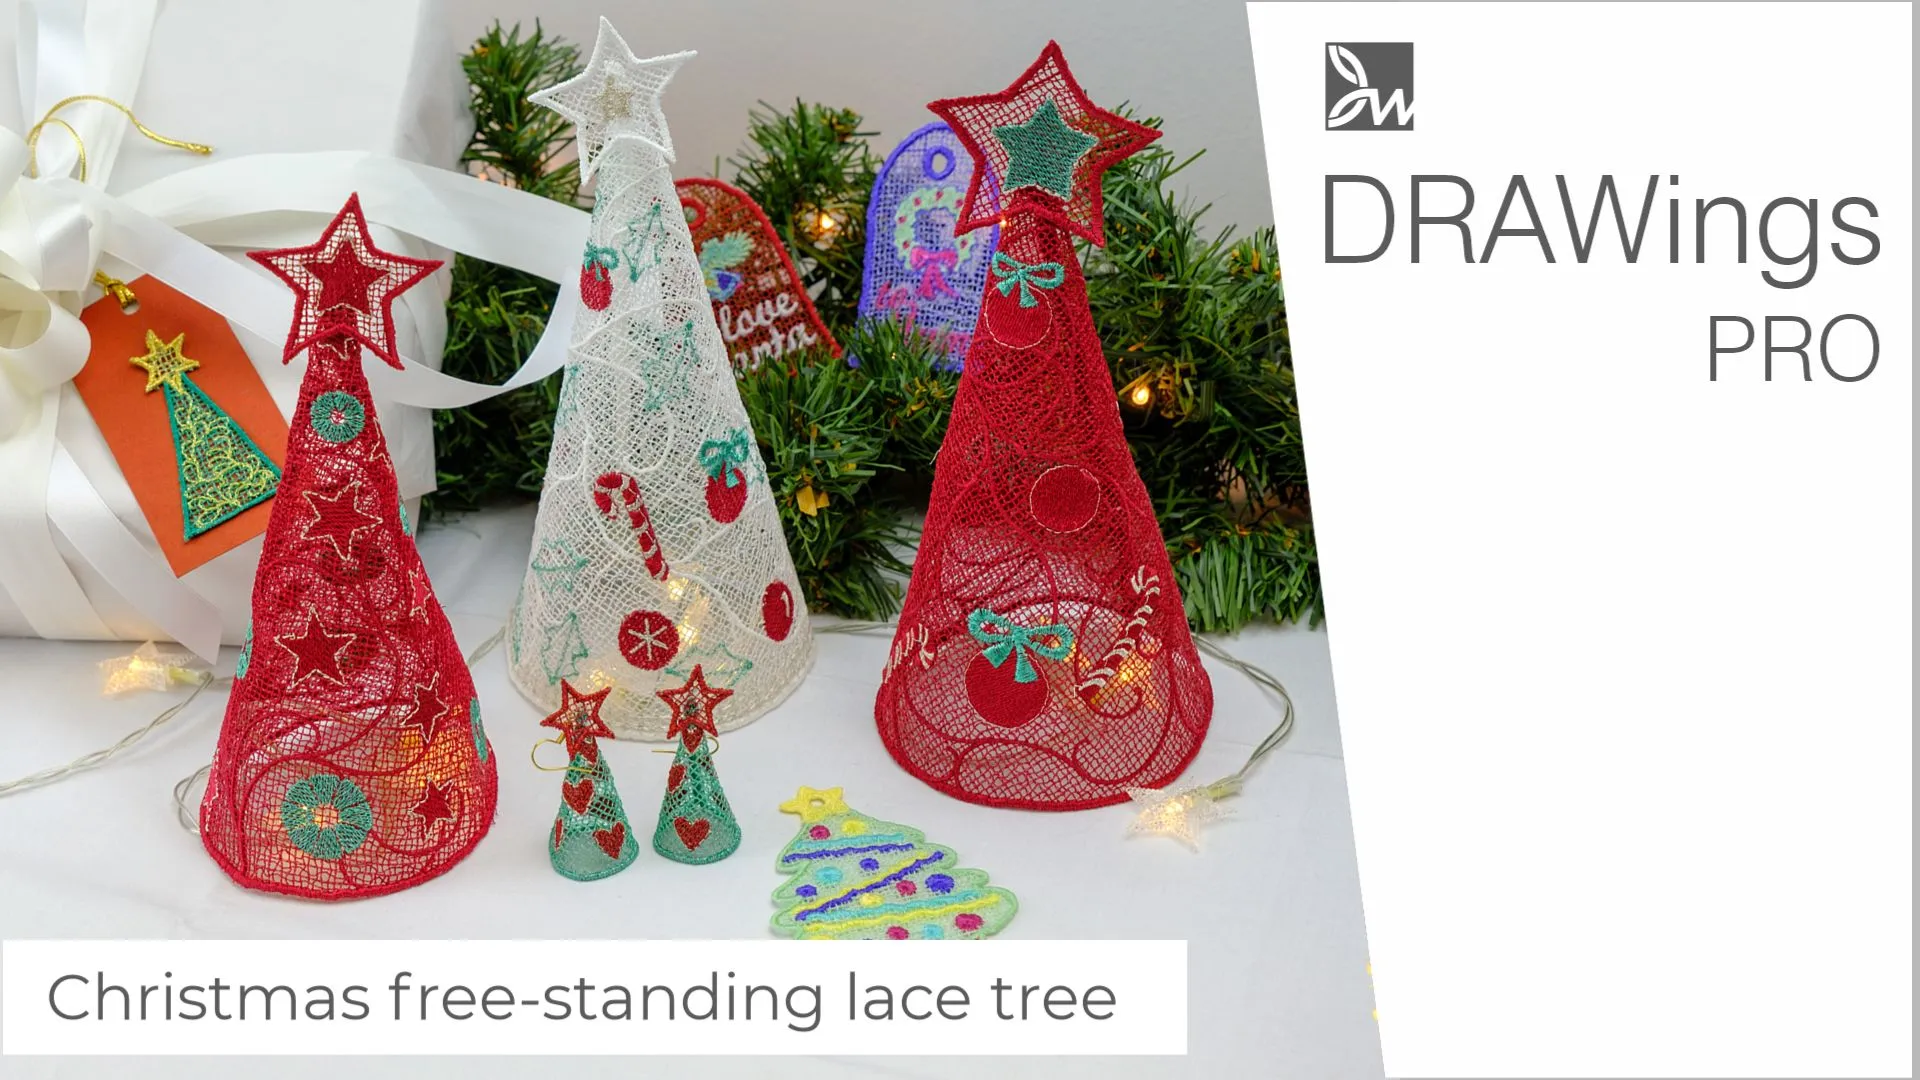 DIY Christmas Free-Standing Lace Tree | An Ornament Crafting Guide